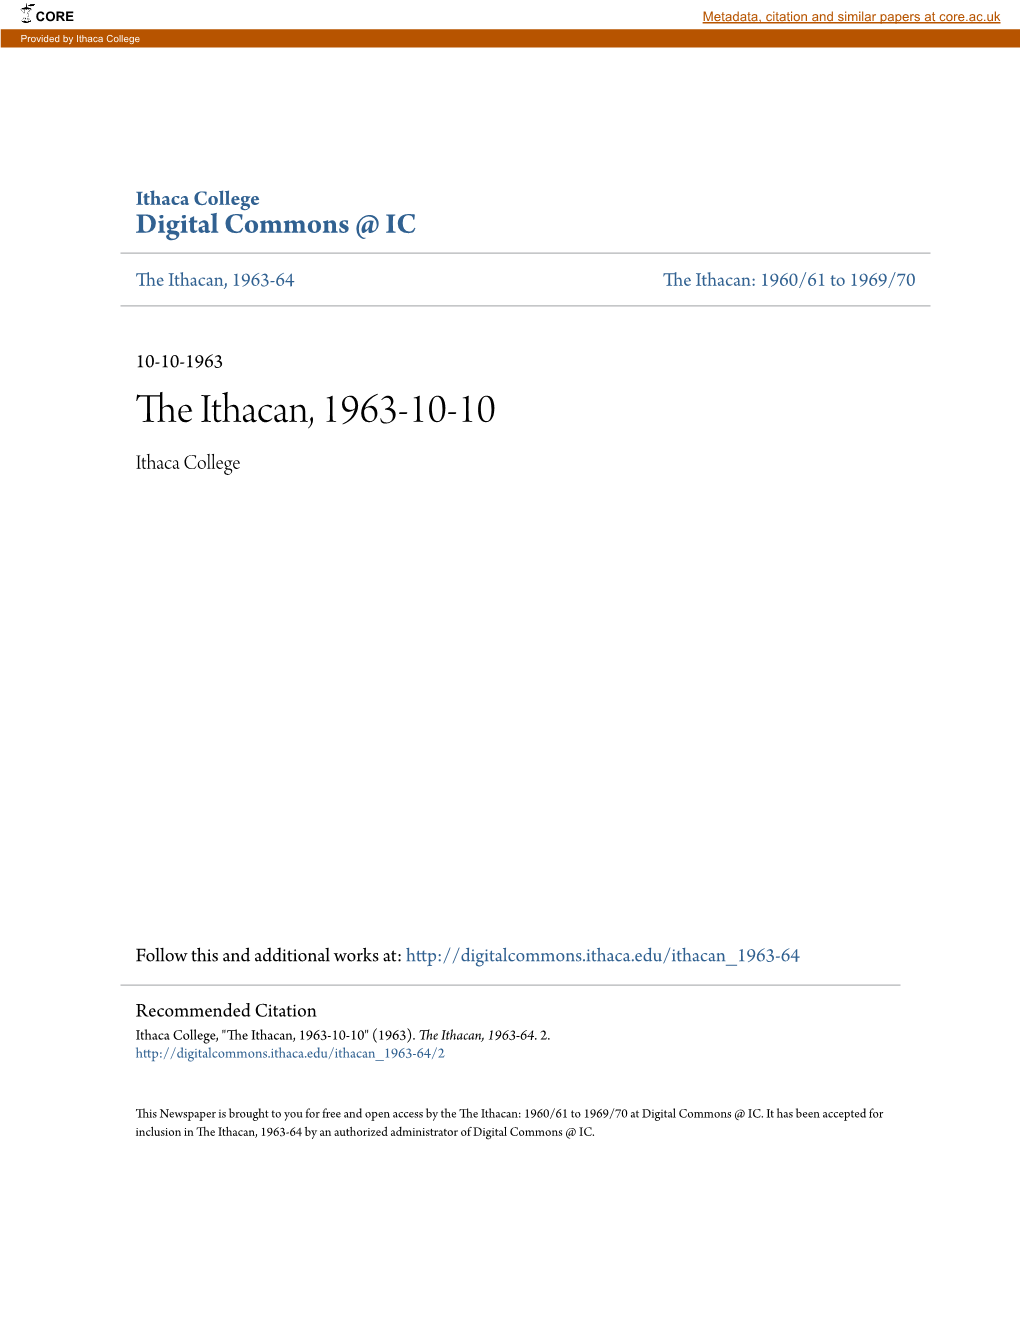 The Ithacan, 1963-10-10